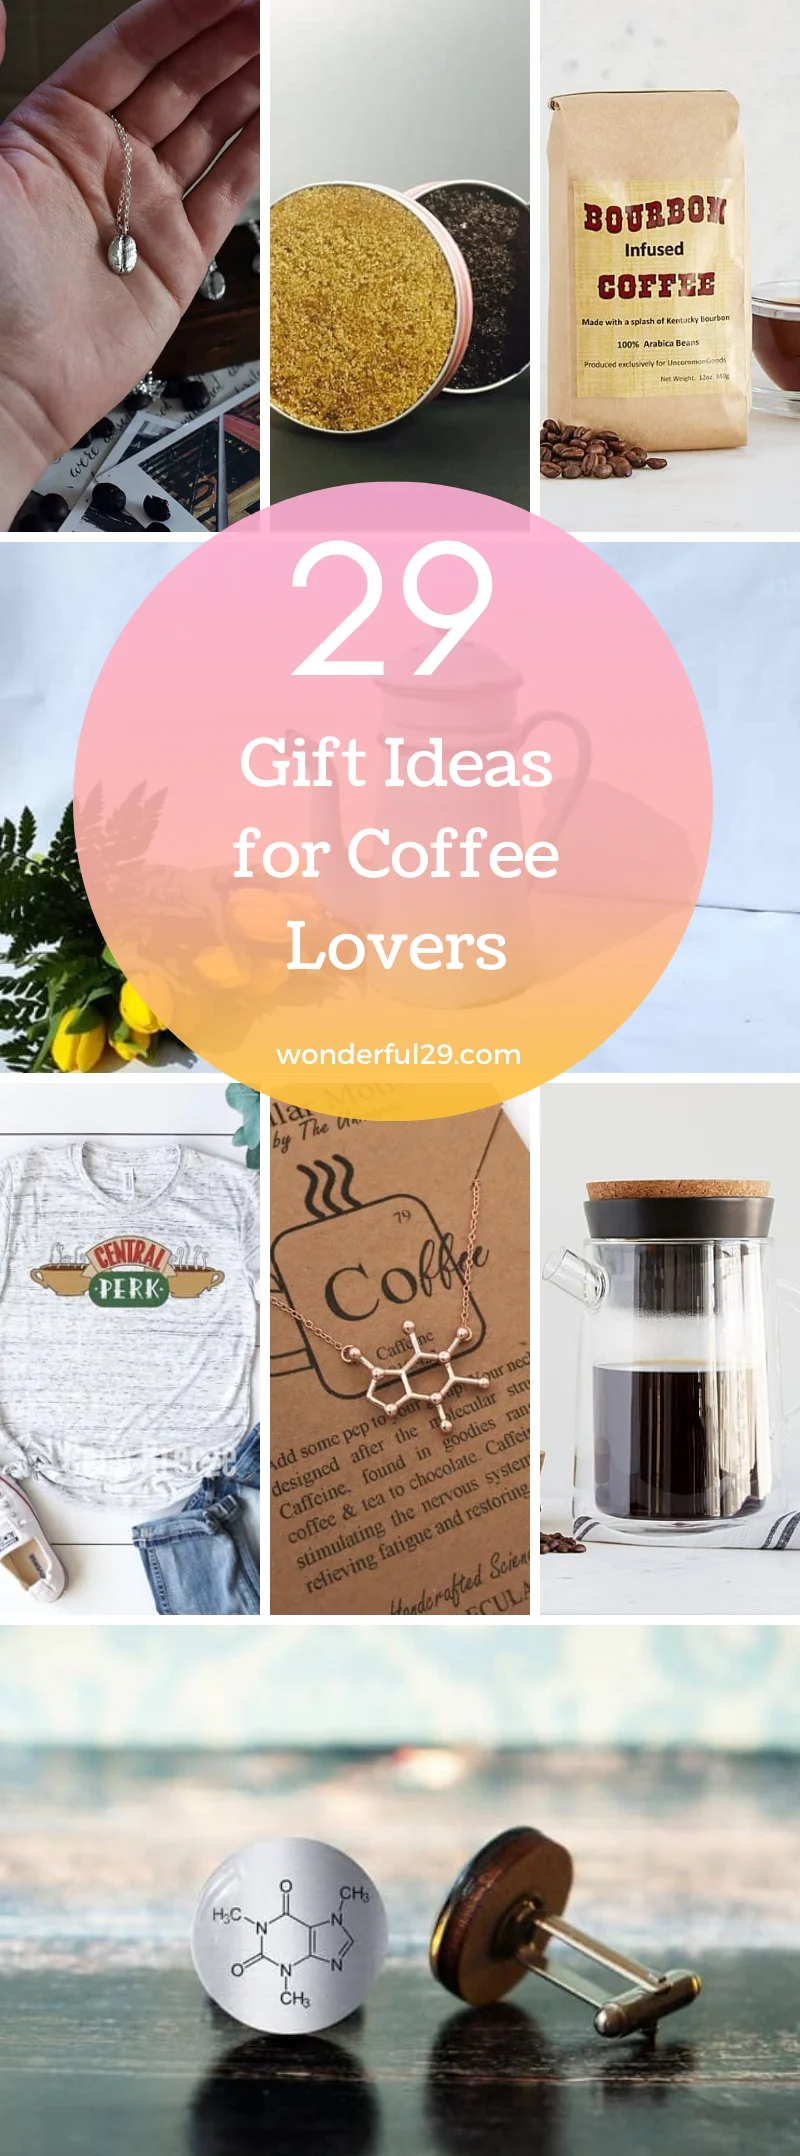 5 of the best gifts for coffee lovers | Food Magazine